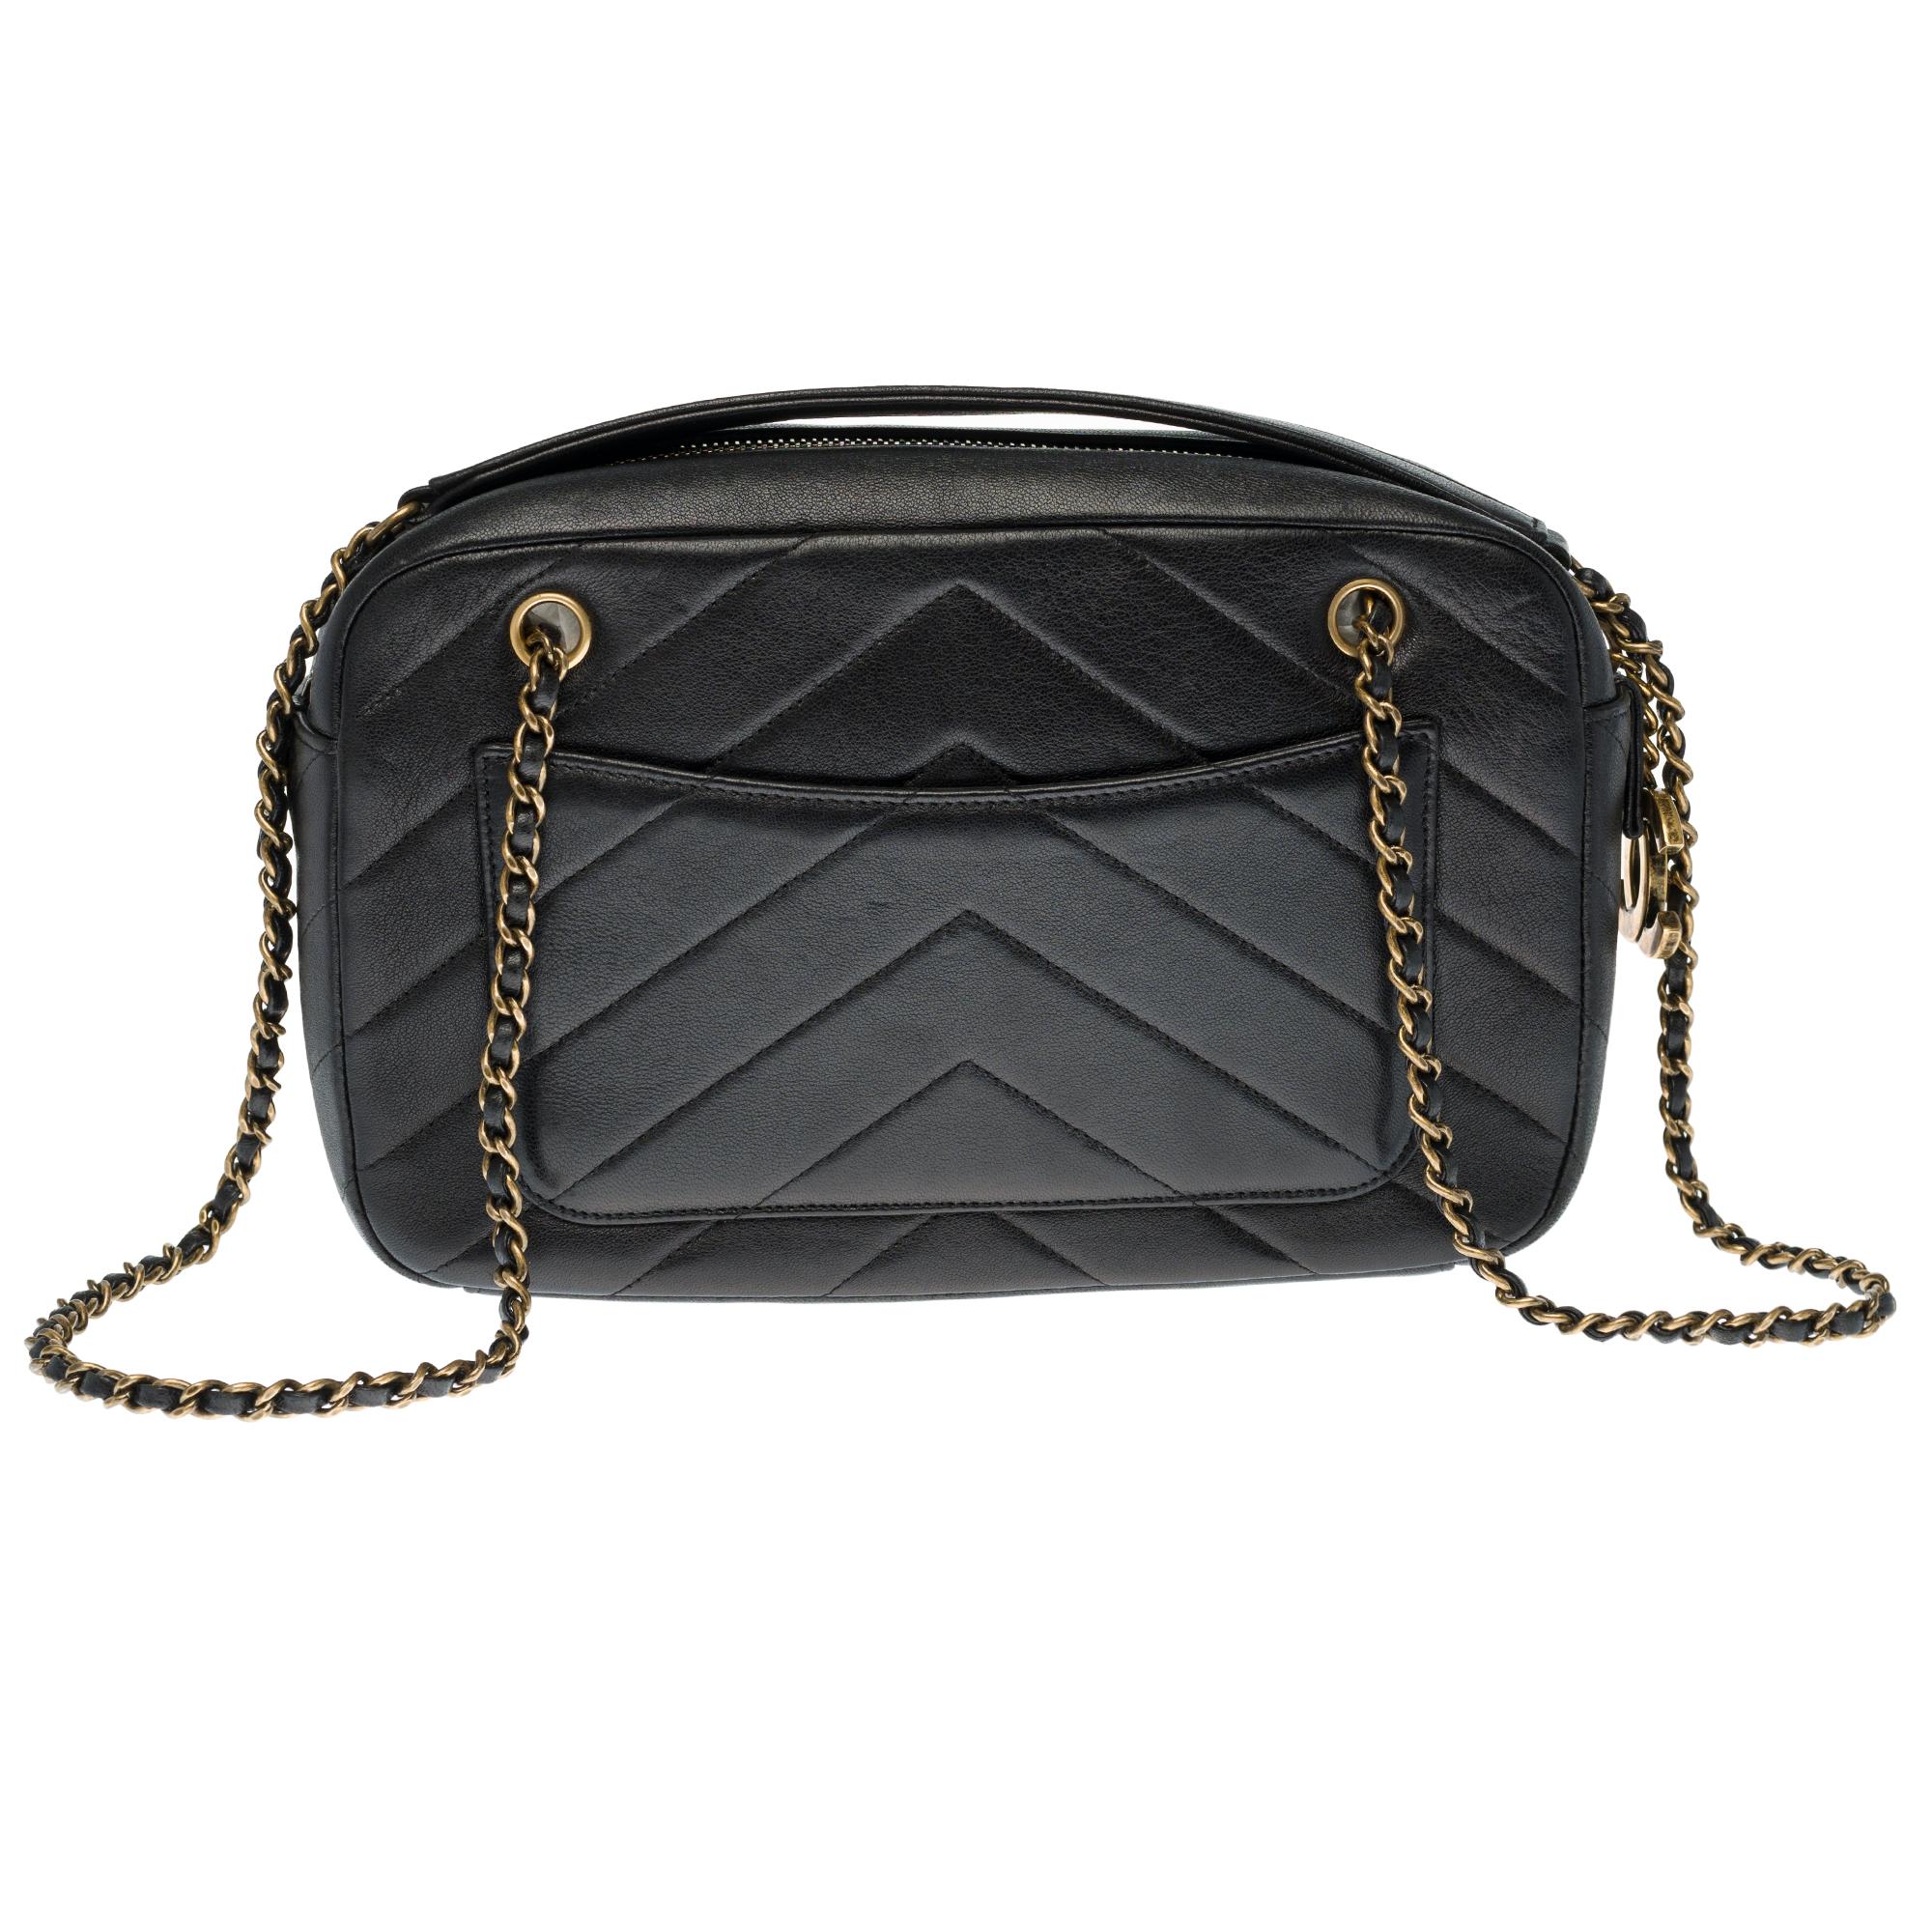 Chanel Camera Front Pocket bag in black herringbone leather, gold-tone metal hardware, gold-tone metal chain handle intertwined with black leather allowing a shoulder or shoulder strap.
* Zip closure.
* One pocket with front CC closure.
* Lining in